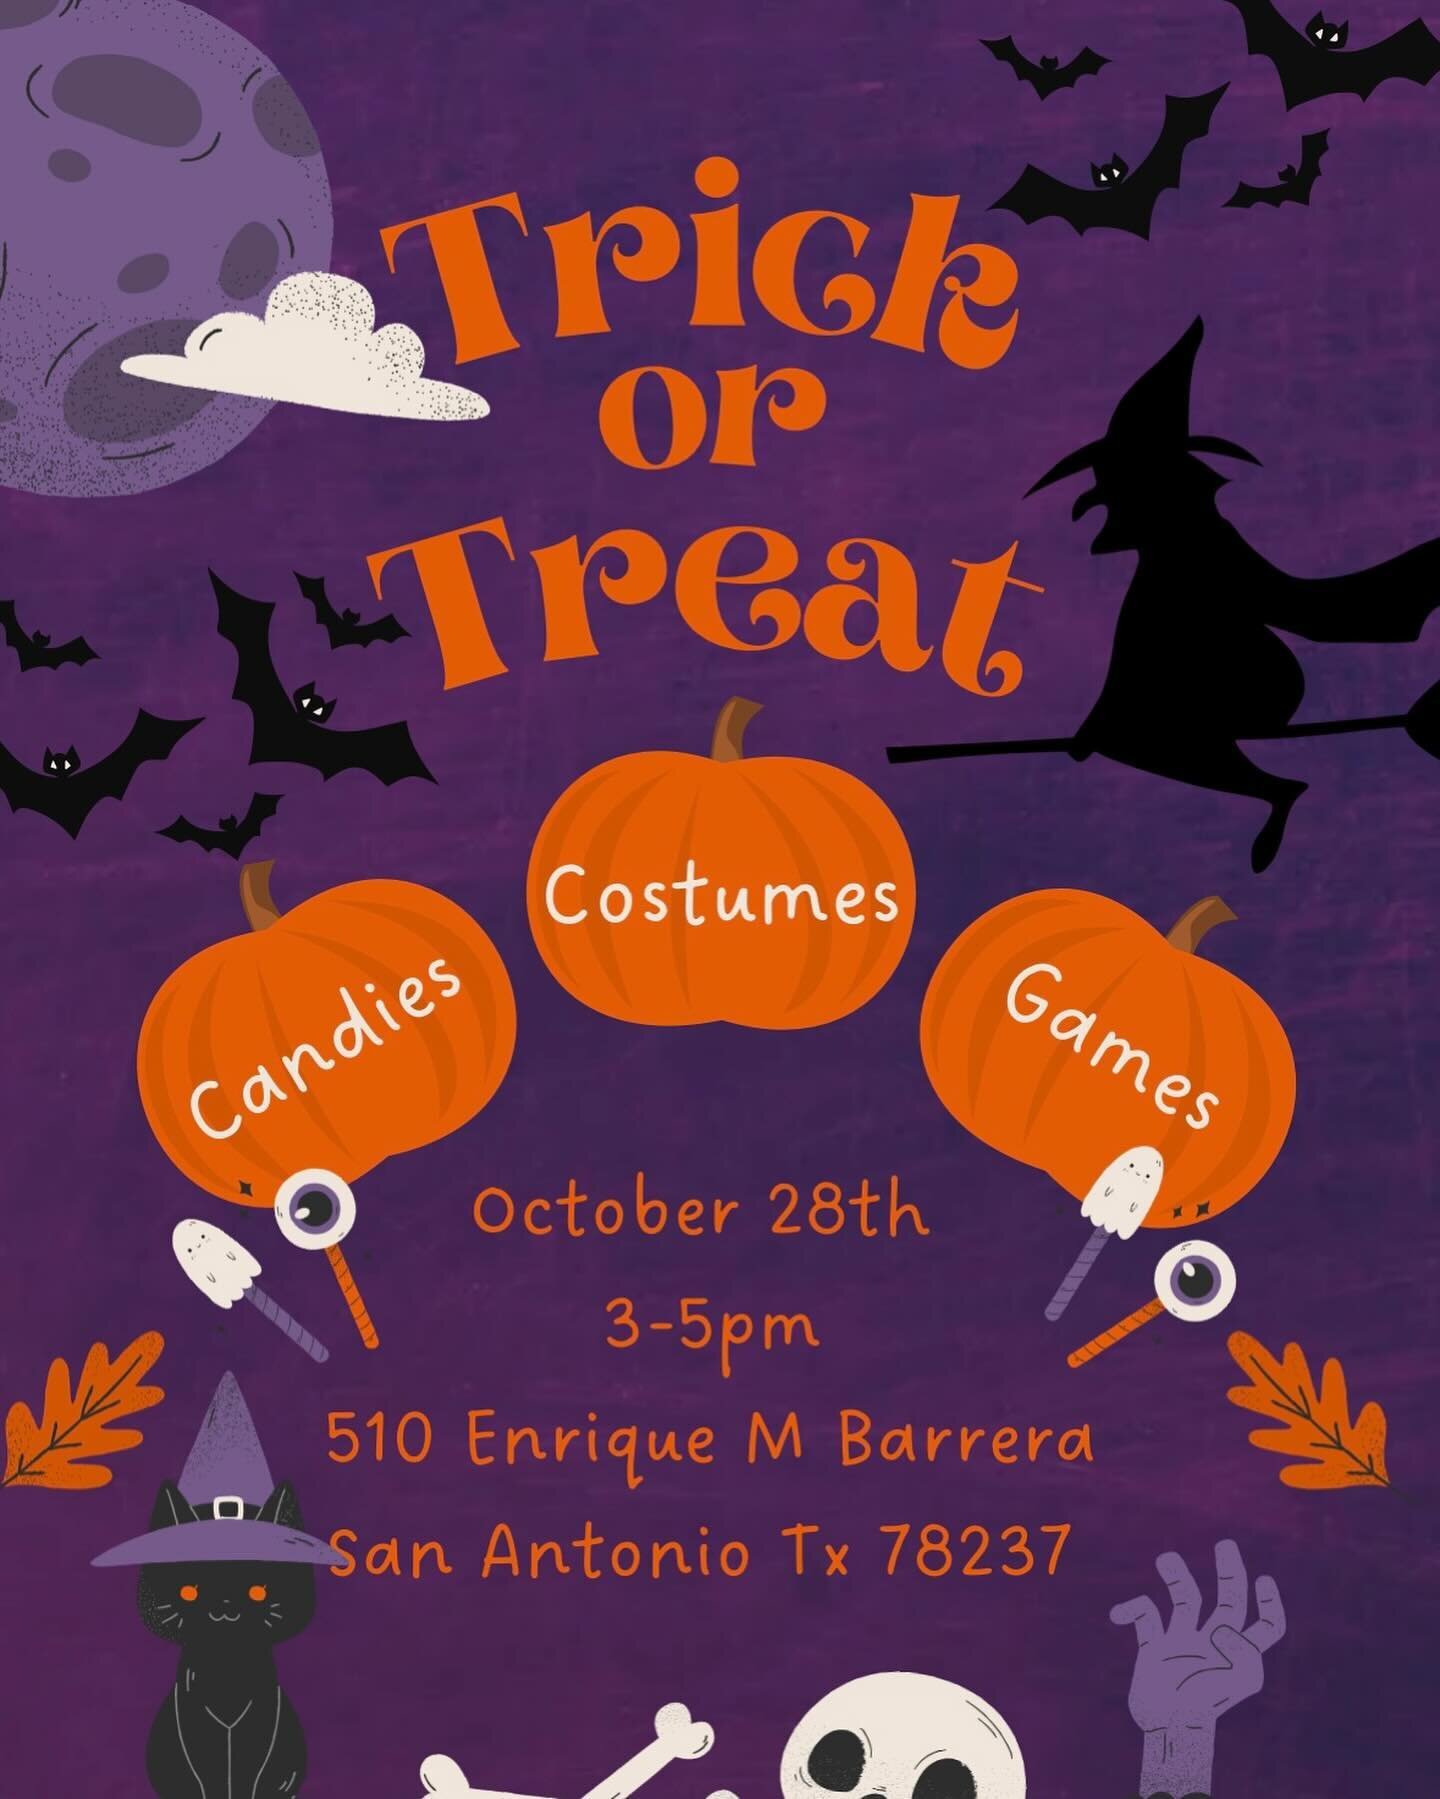 🎃🎃🎃 Trick or Treat 🎃🎃🎃

Come stop by October 28th from 3-5 

📍 510 Enrique M Barrera Parkway San Antonio Tx 78237

The priority girls will be out there handing out candy!! Music 🎶 Games 🎯 Costumes Contest 👻

🕸️🕸️ We can&rsquo;t wait to ha